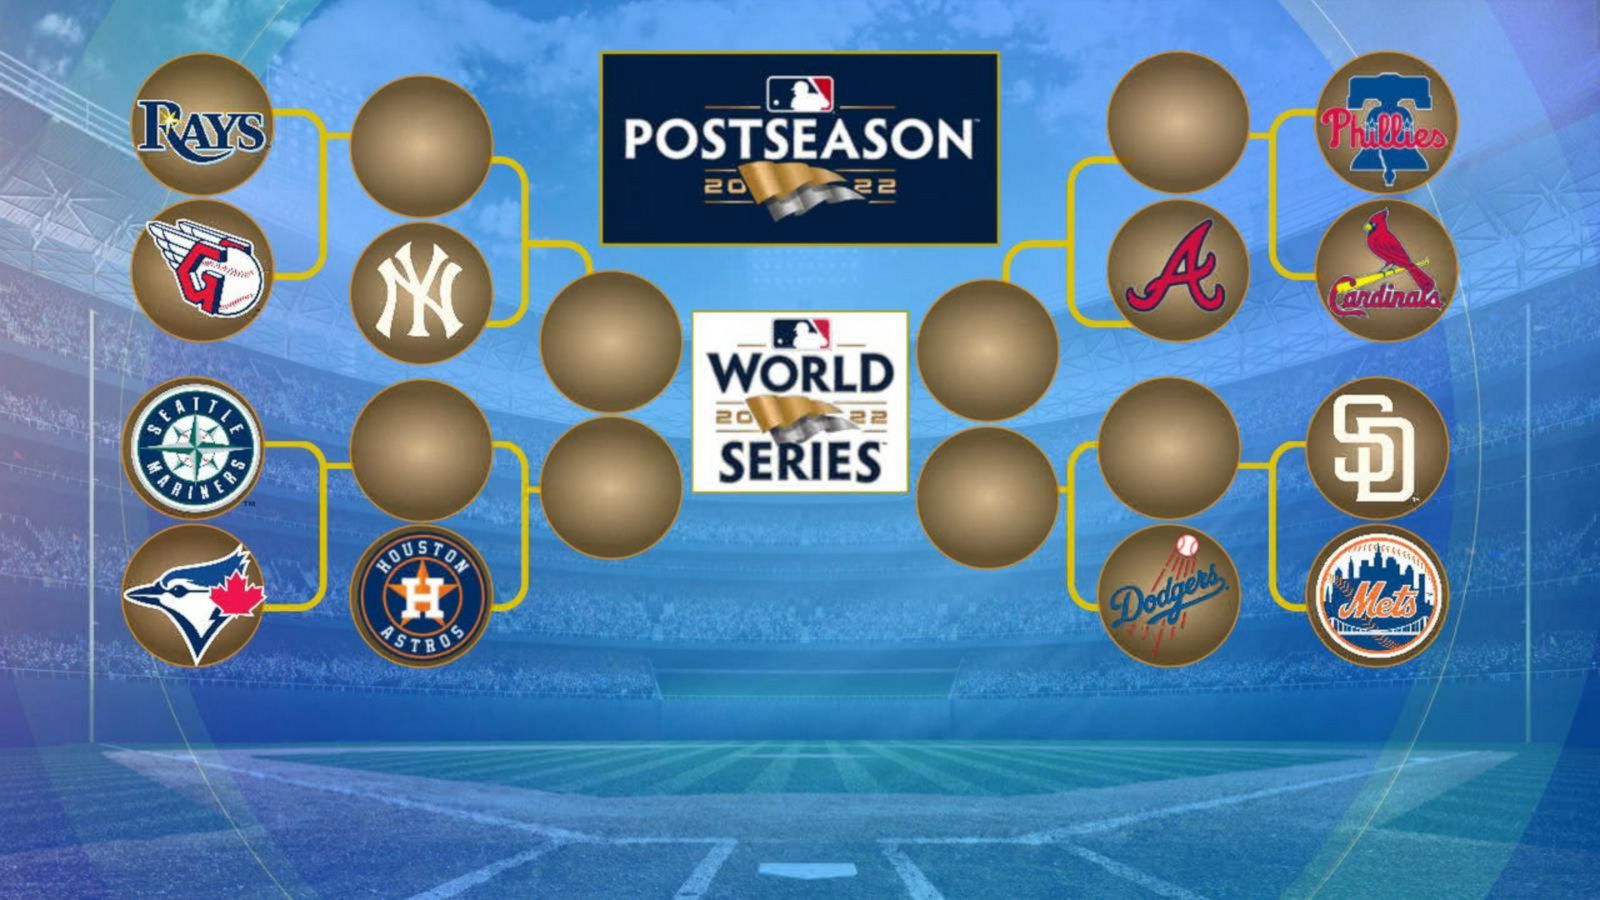 MLB playoffs begin with new format Good Morning America